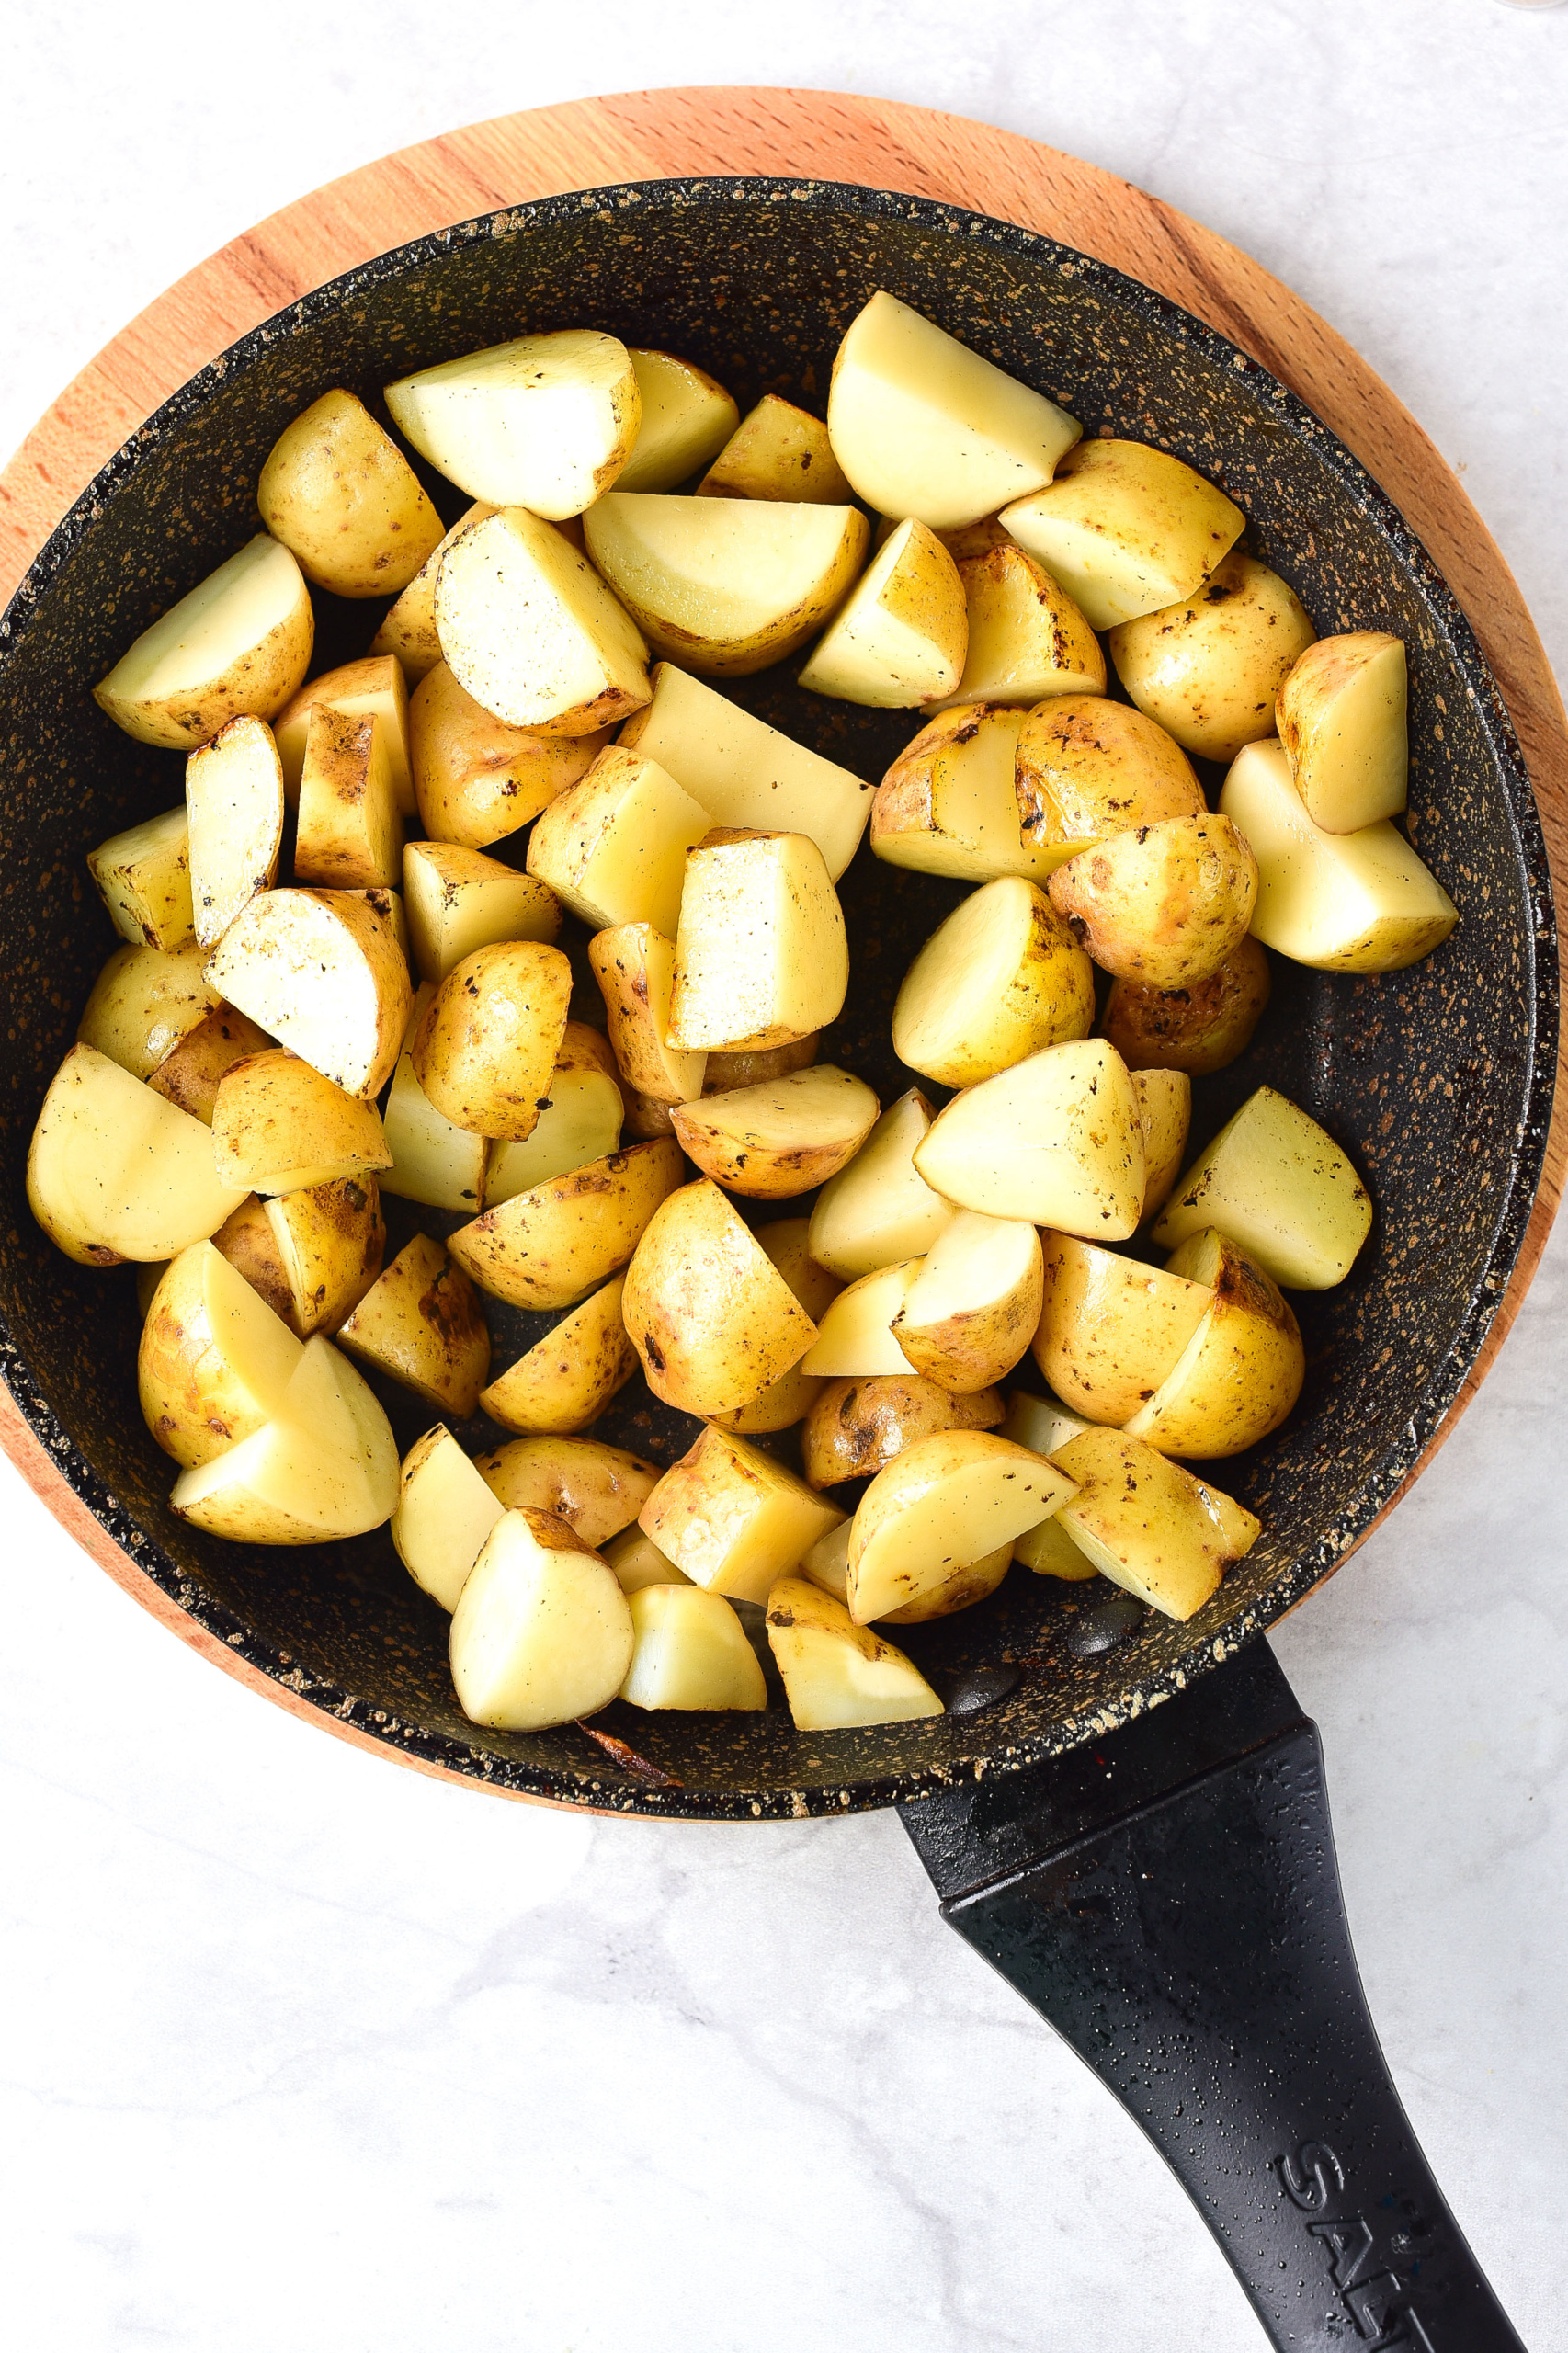 Baby potatoes cooking in skillet.